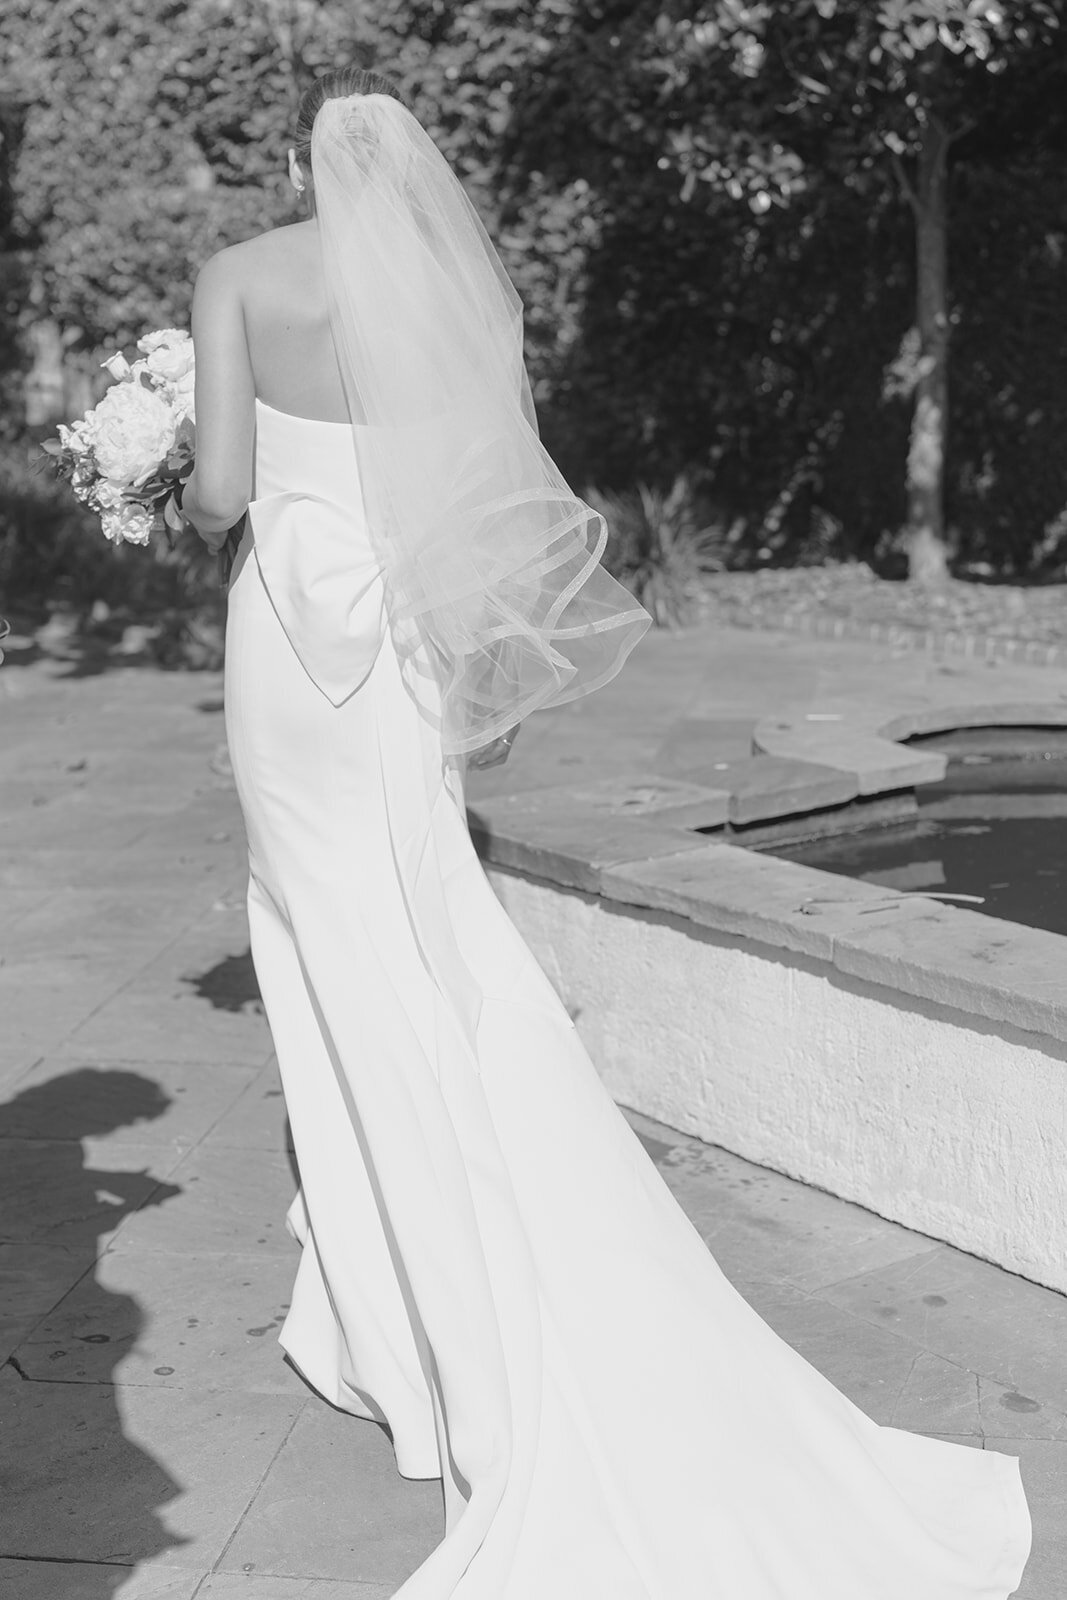 Wedding veil blows in the wind as bride walks to outdoor wedding ceremony at William Aiken House.  Black and white destination wedding photographer. Kailee DiMeglio Photography.